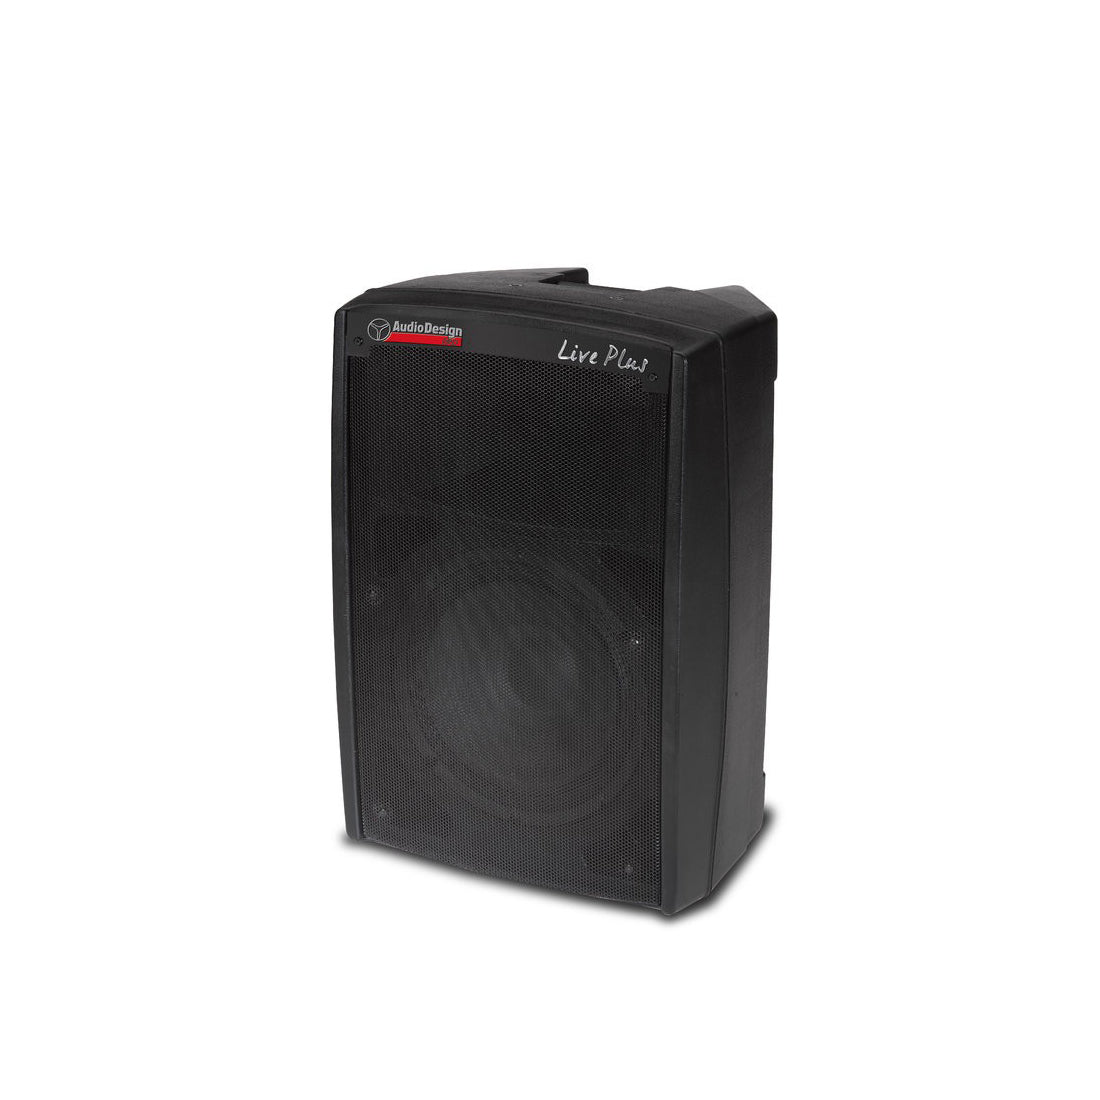 AudioDesign Pro Professional 2-way active speaker, max/RMS power, 32 cm woofer cabinet, Live Plus 12 speaker